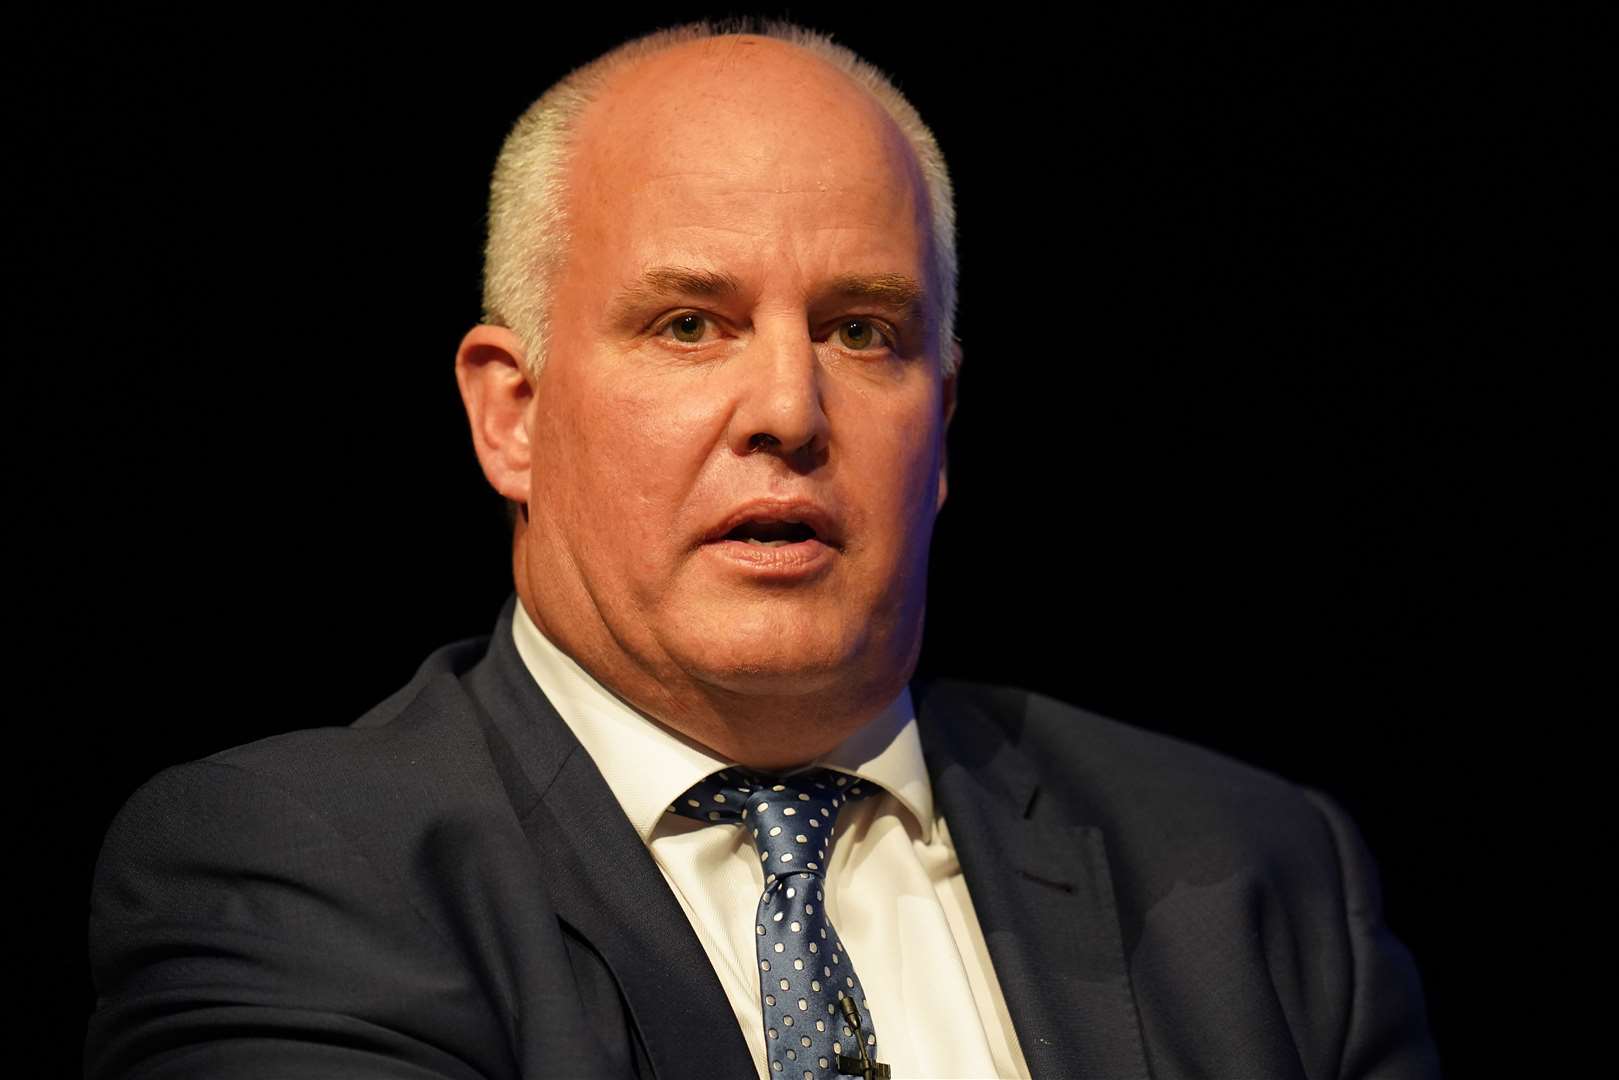 Leader of the Welsh Conservatives Andrew RT Davies said he believed a blast furnace could have remained open during the transition period (Jacob King/PA)